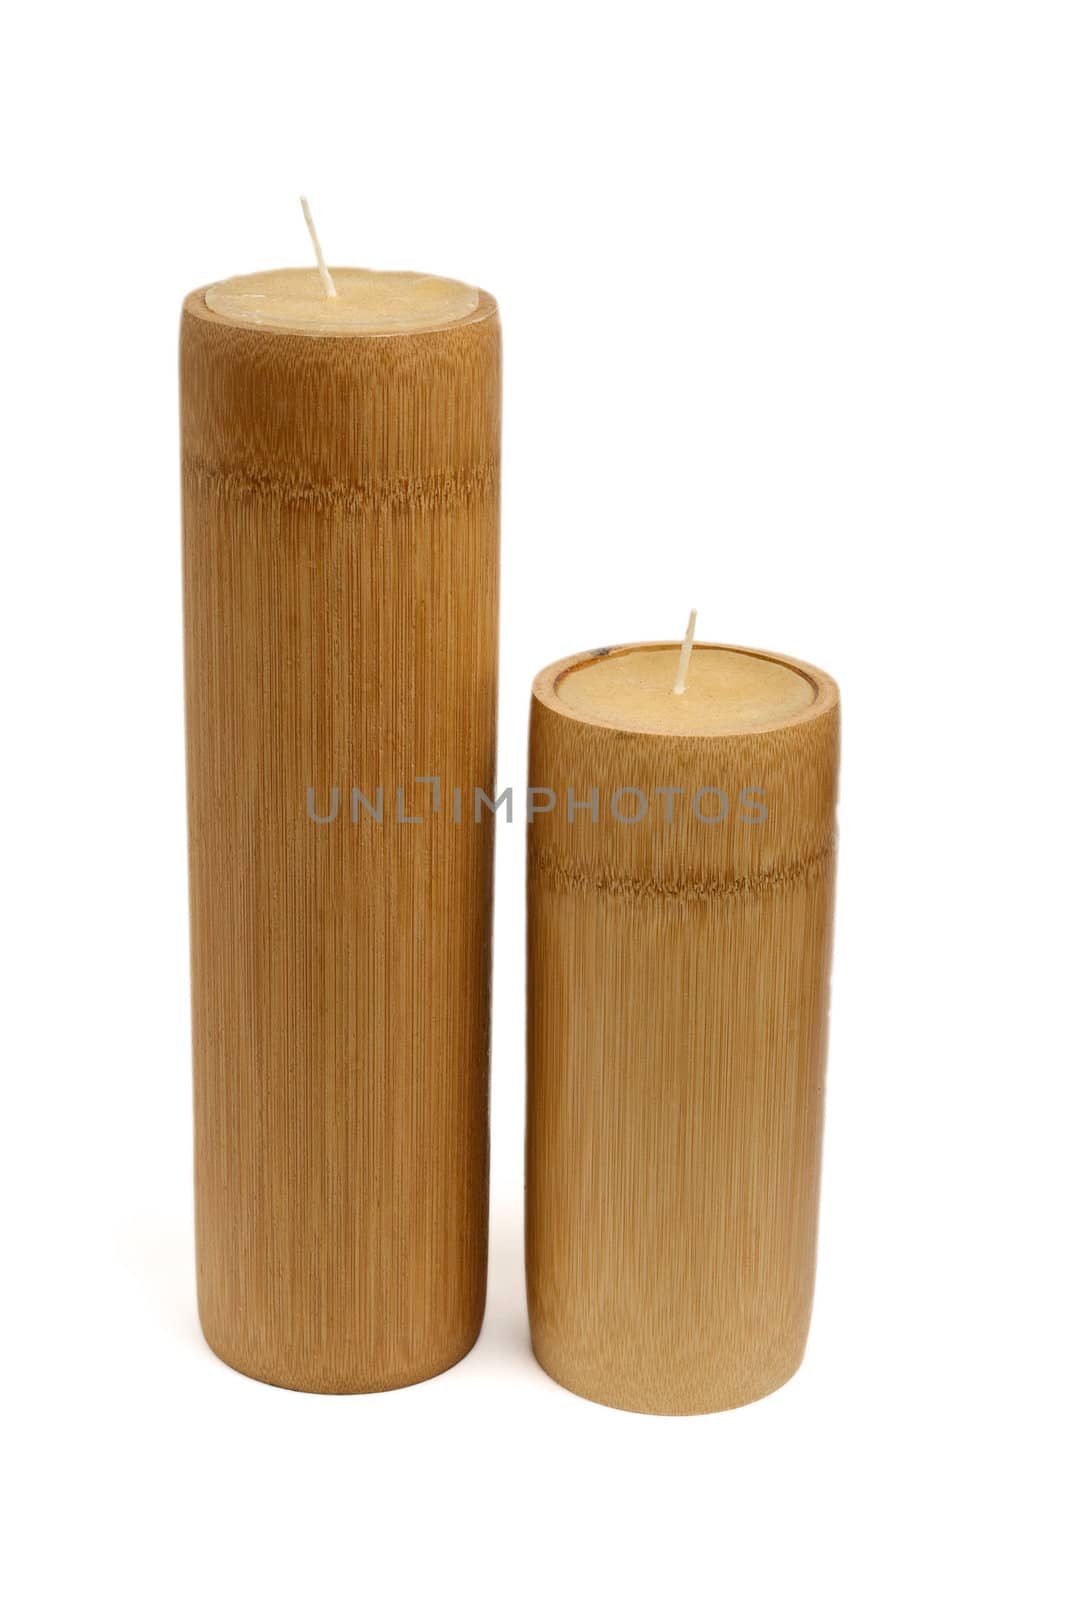 two wooden unlit candles, isolated on white